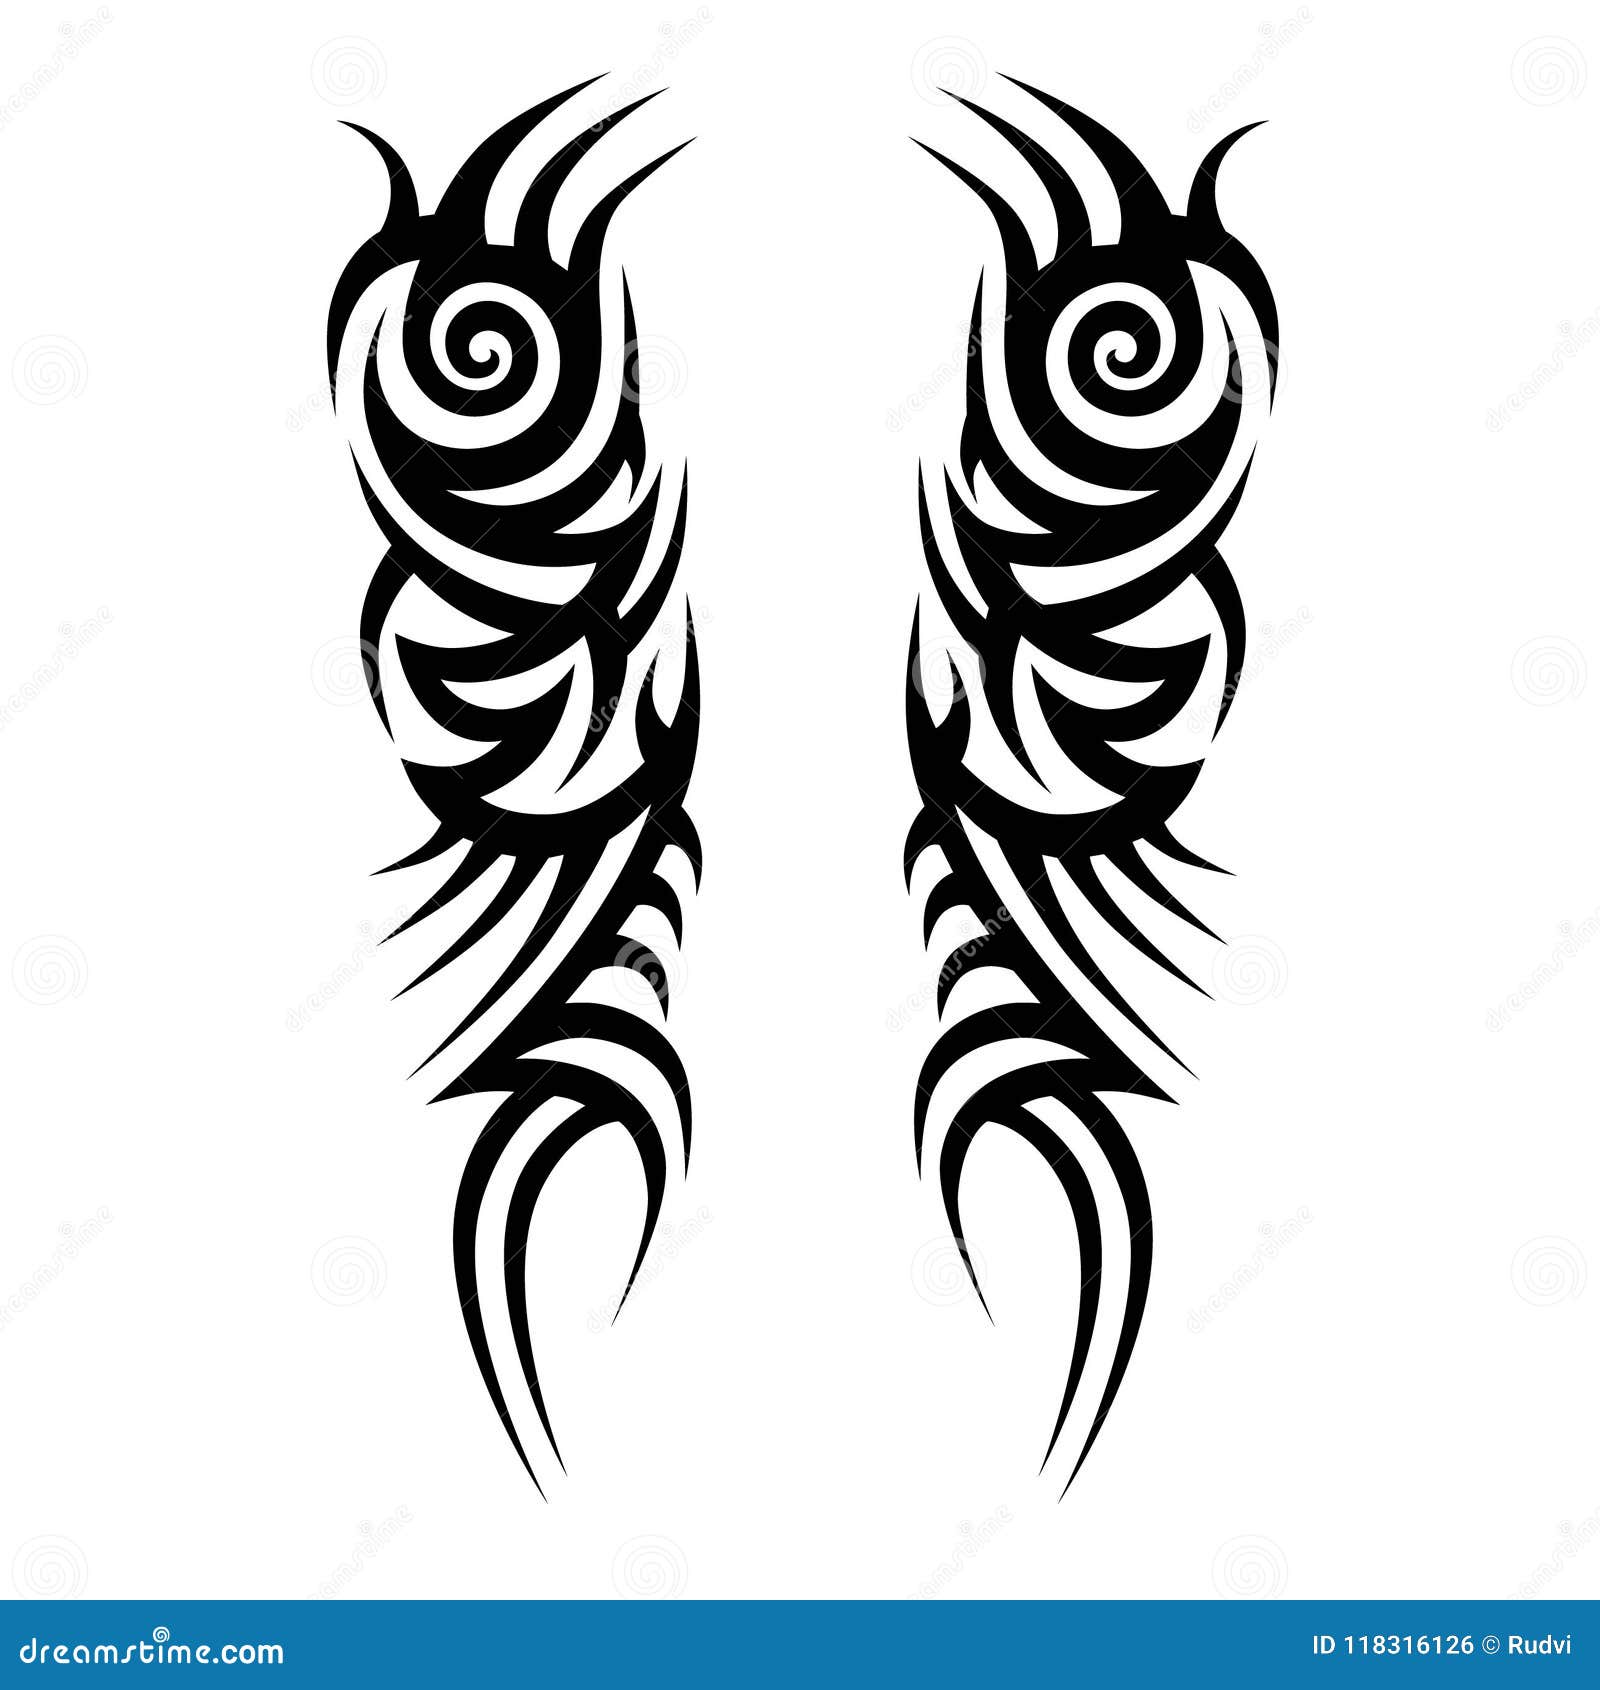 Tattoo Tribal Vector Design Sketch. Stock Vector - Illustration of armband,  chest: 118316126